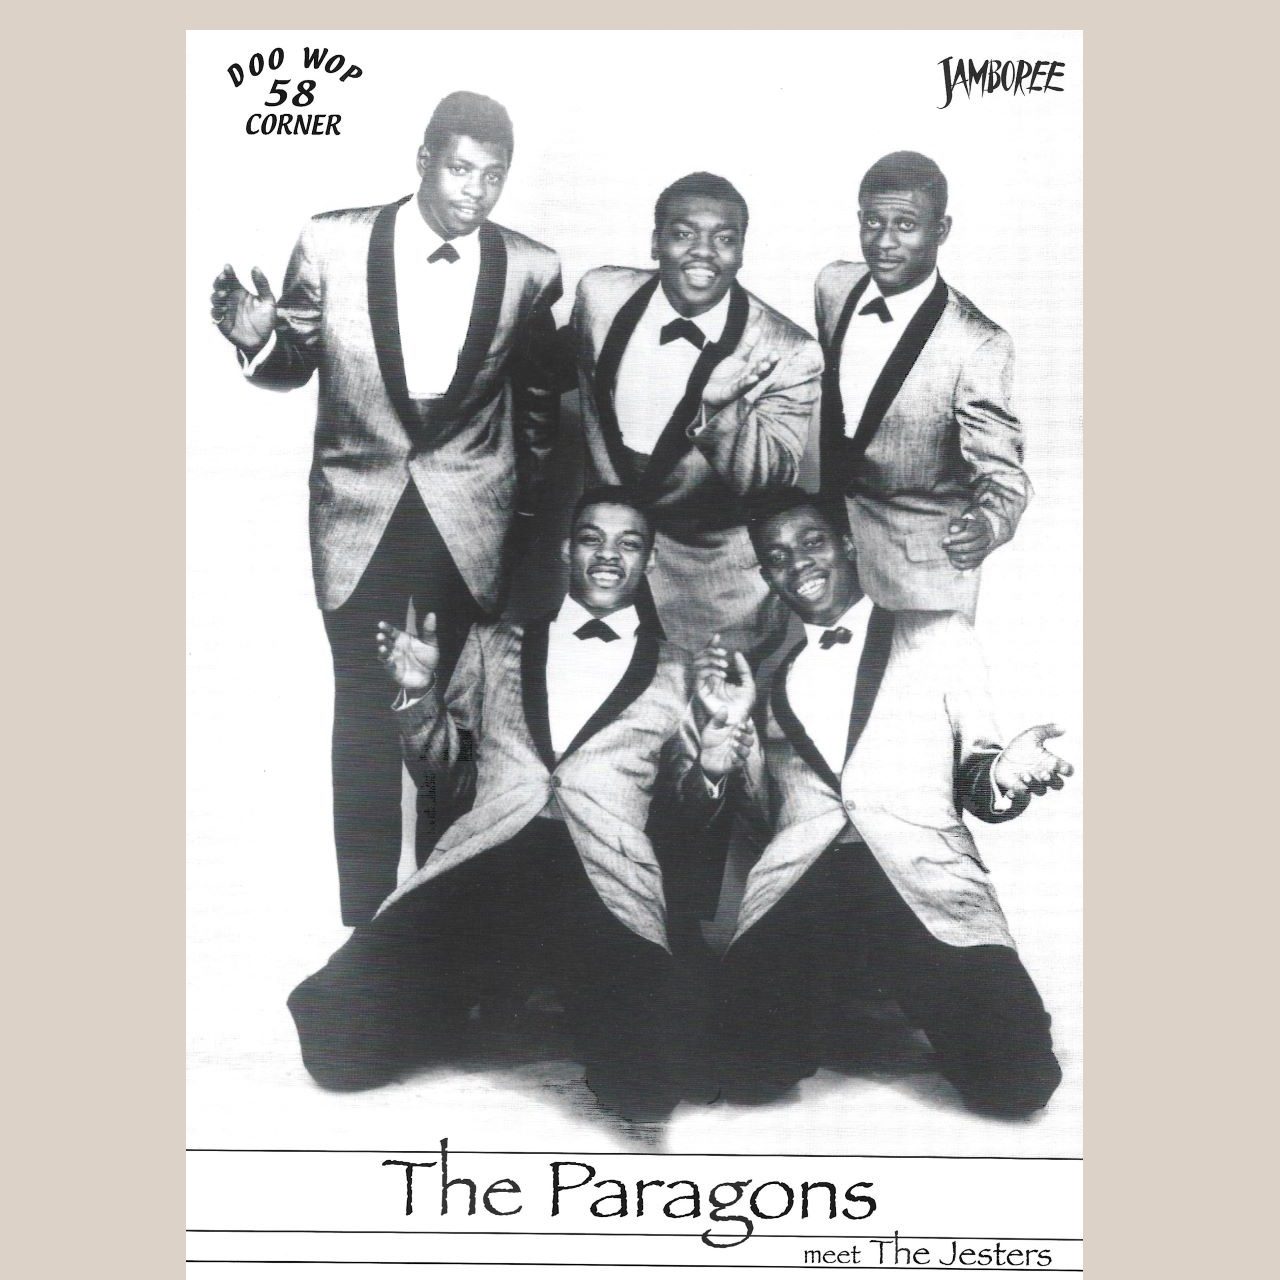 Doo Wop Corner - The Paragons_The Jesters